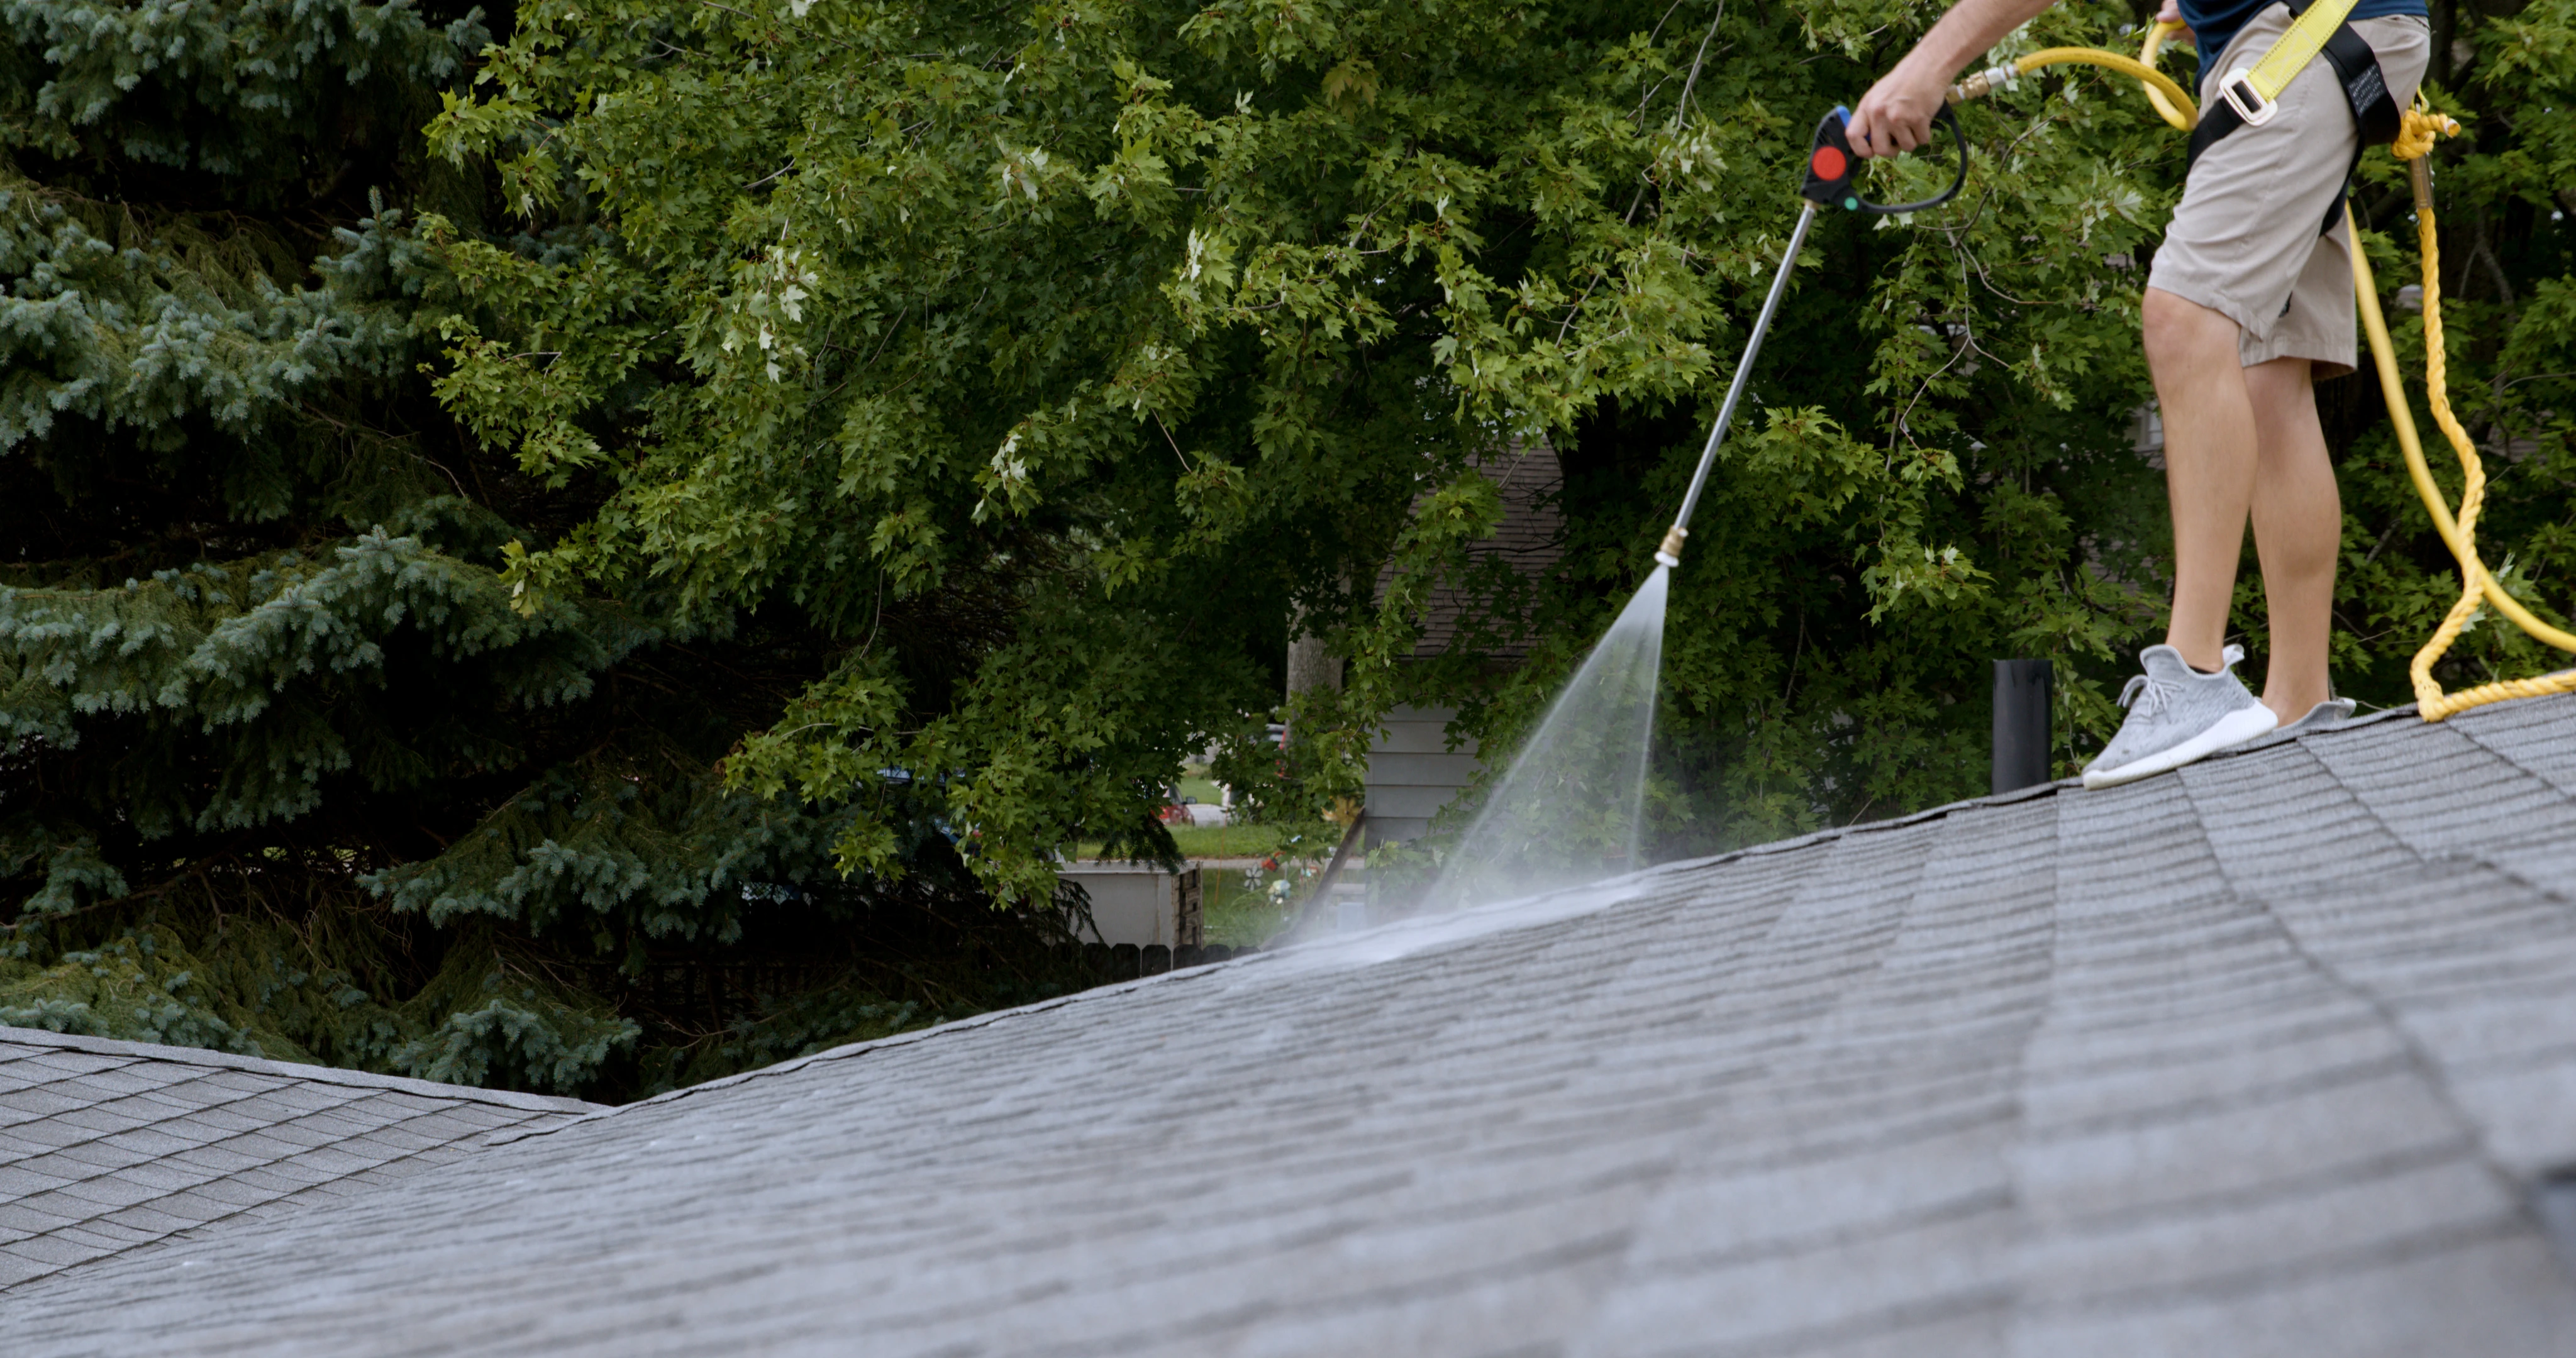 Roof Rejuvenation in Florida: Extend the Life of Your Roof with The Roof Saver Peak 301